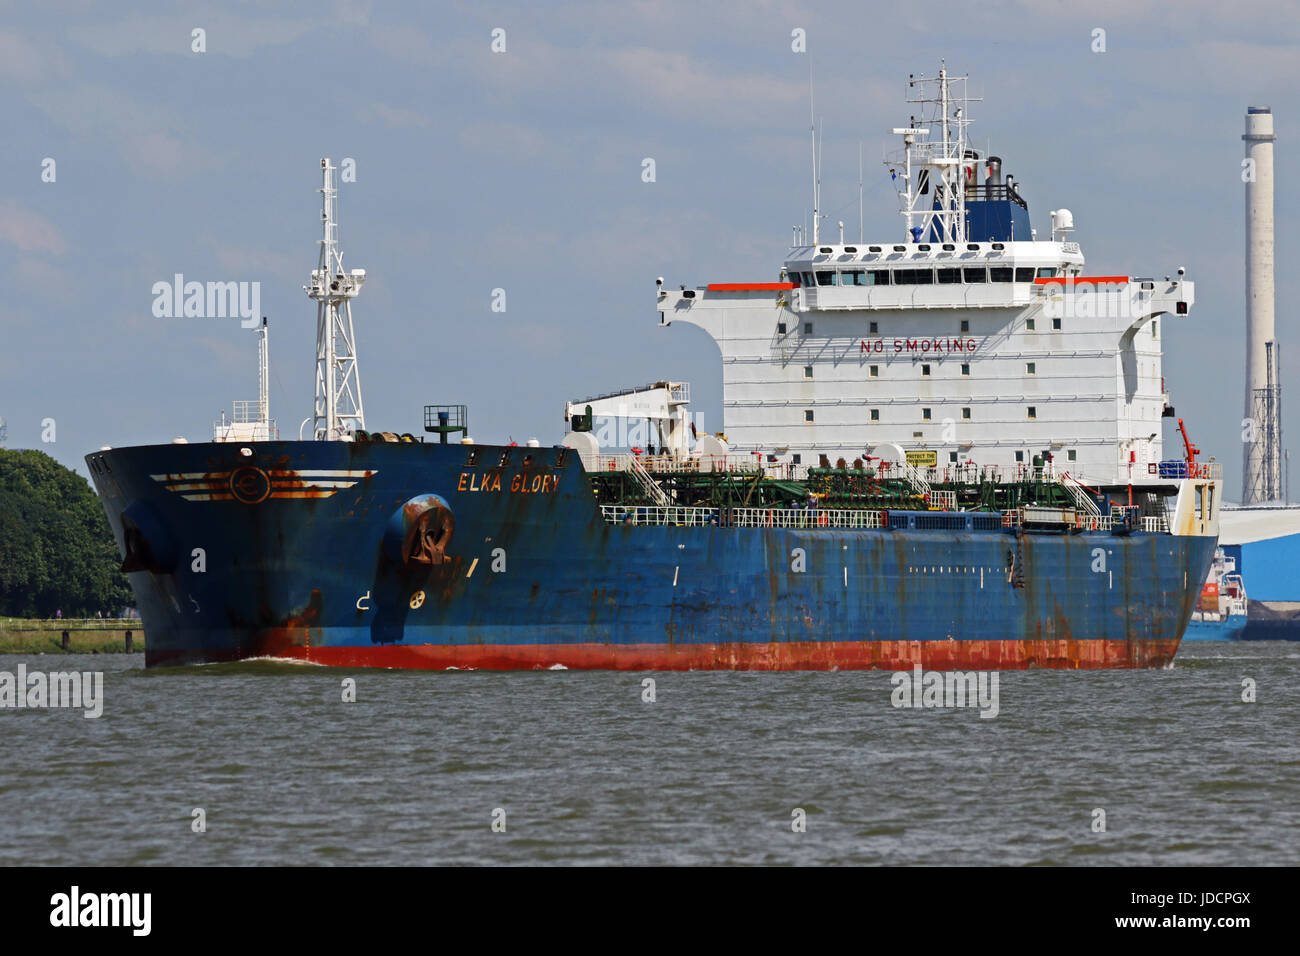 The tanker Elka Glory leaves the port of Rotterdam. Stock Photo